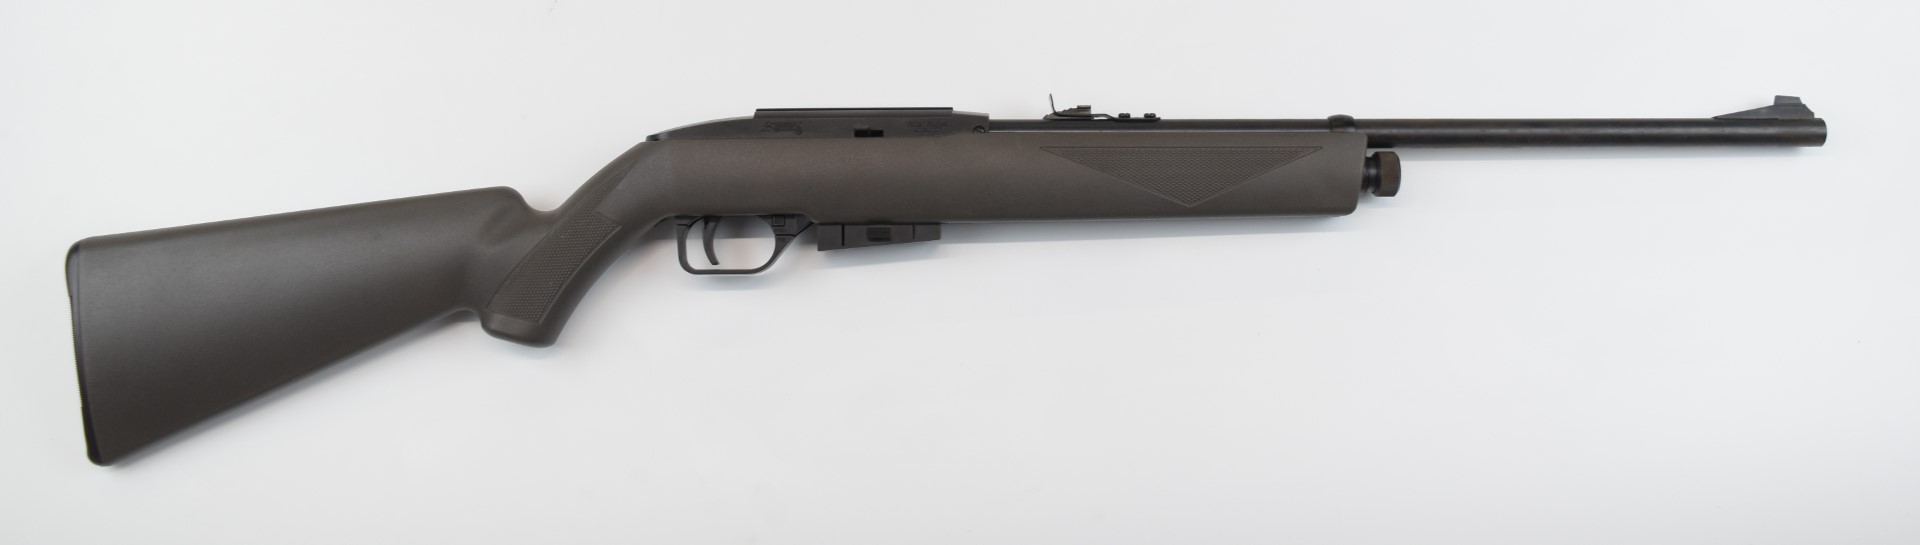 Crosman Model 1077 repeater .177 CO2 air rifle with chequered semi-pistol grip, composite stock, - Image 3 of 18